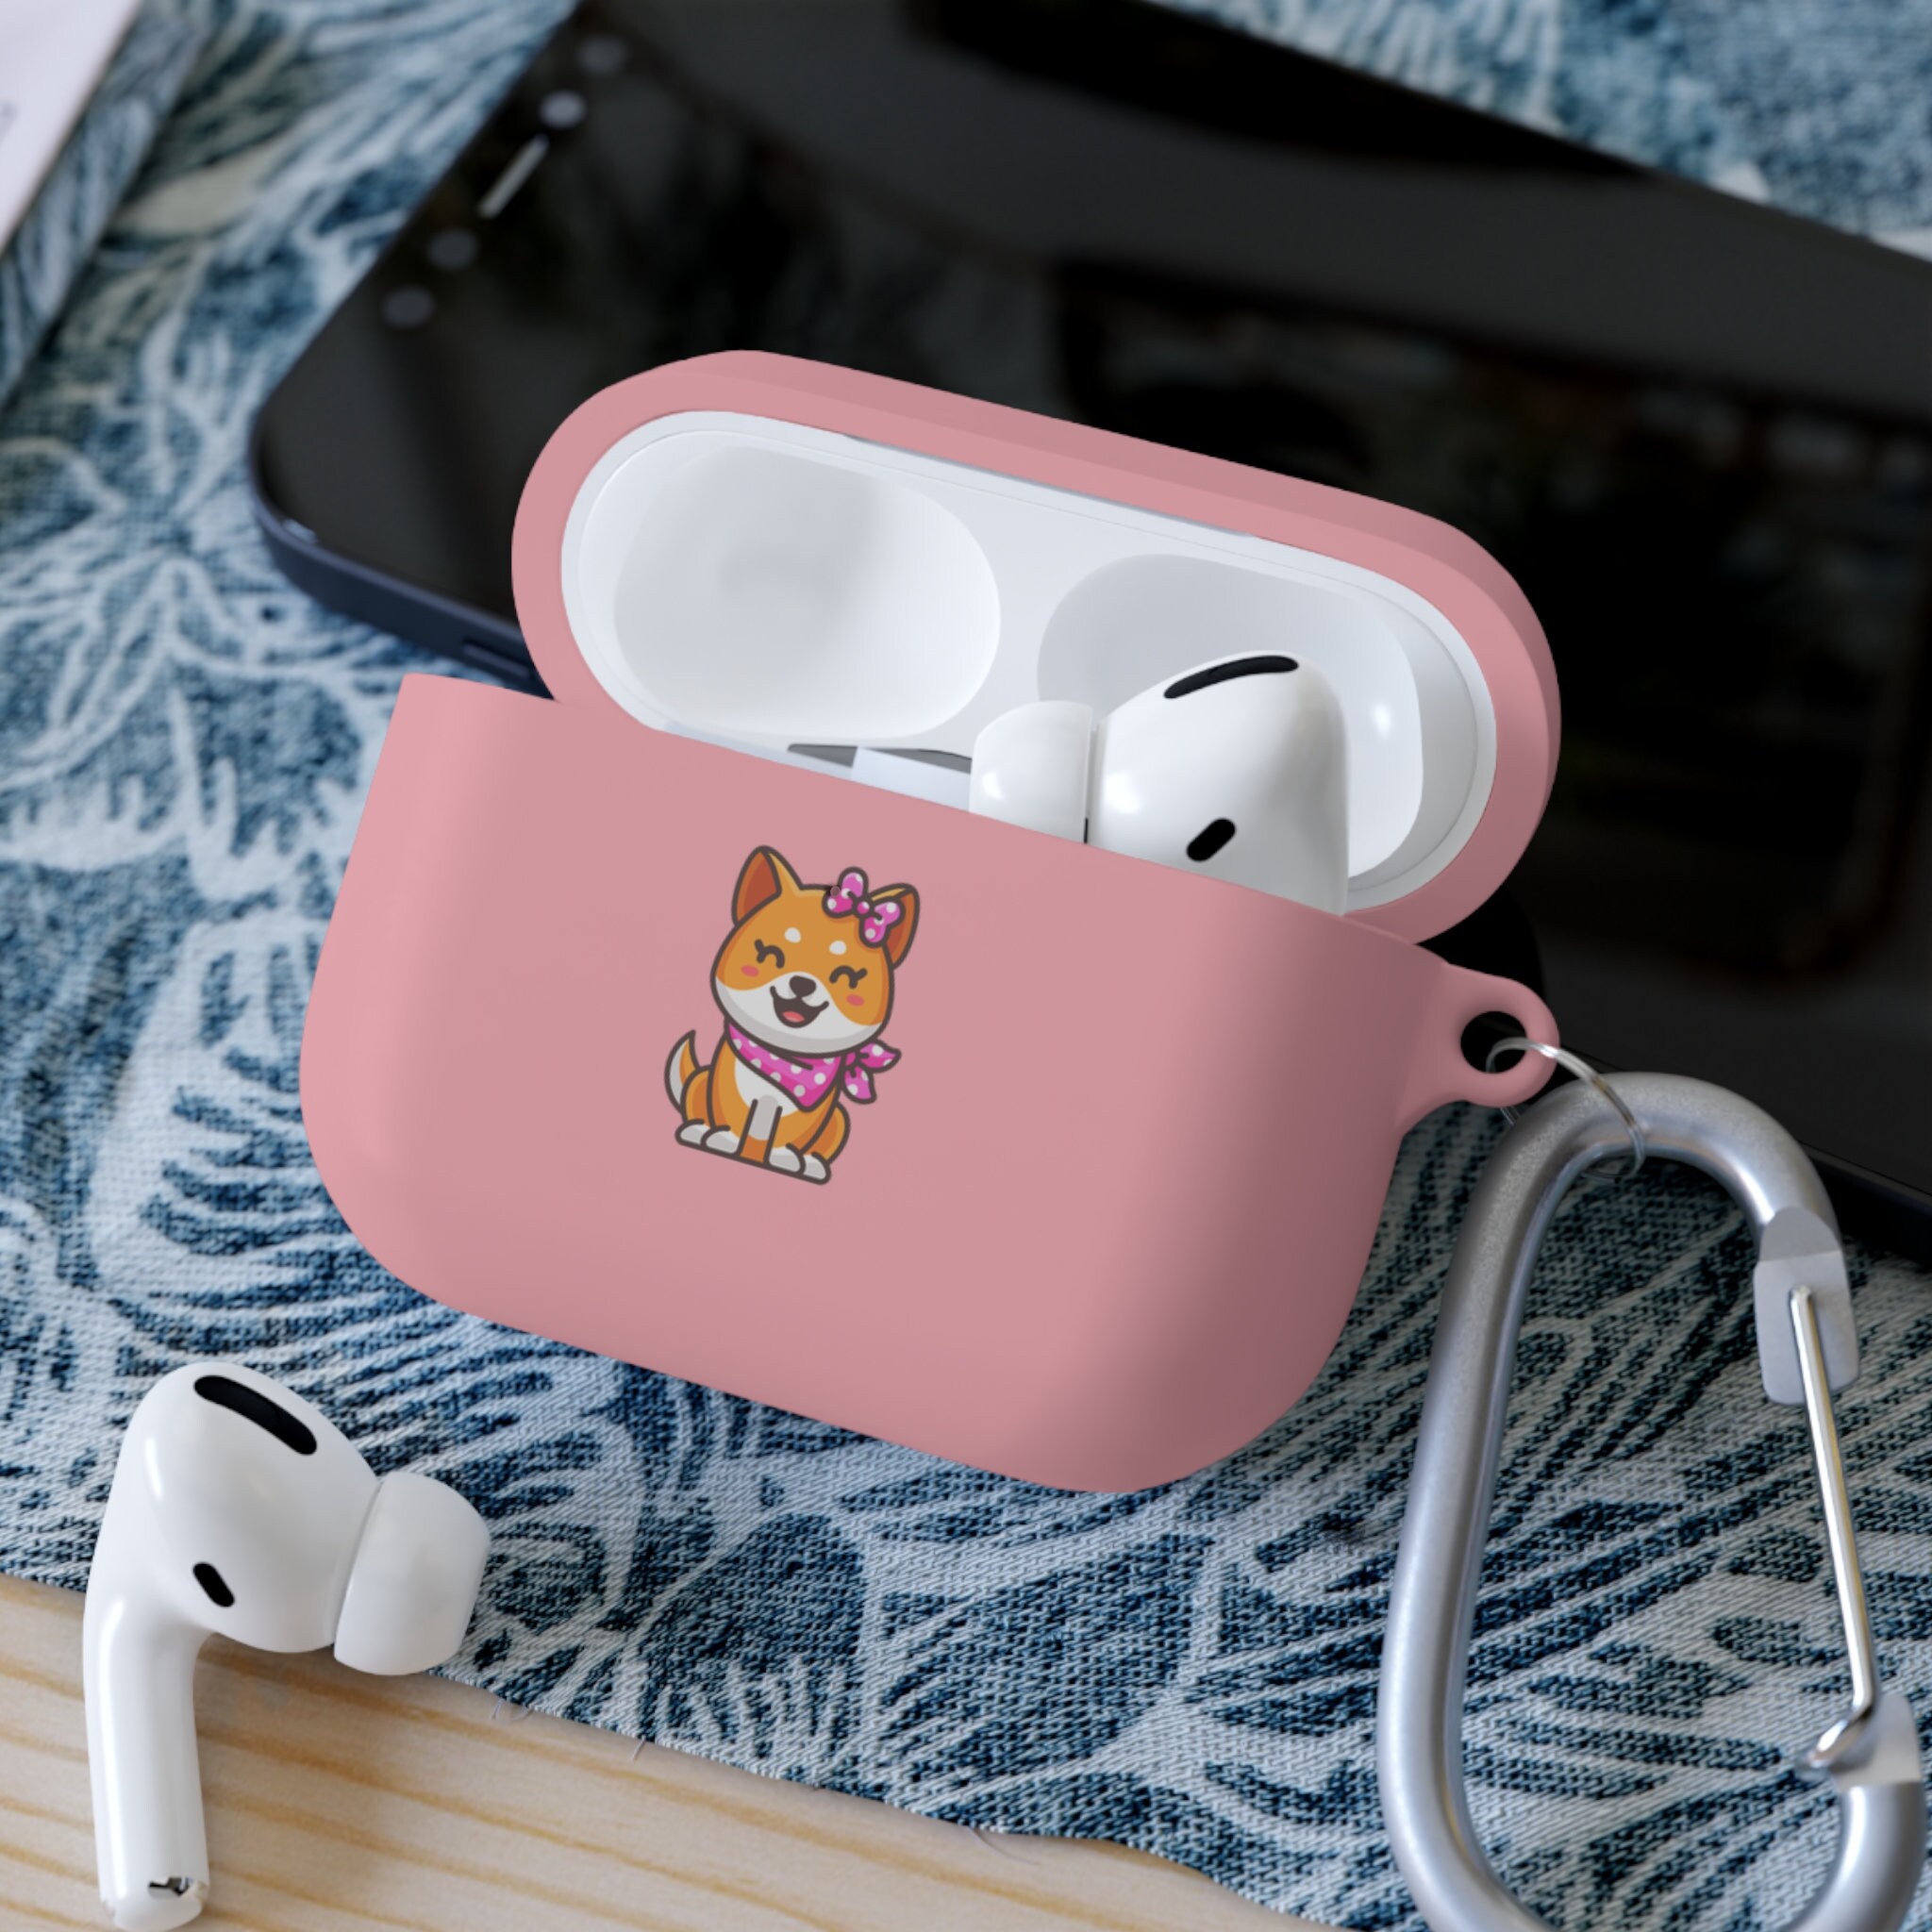  Wonhibo Cute Elephant Airpods Case,Light Blue Silicone Kawaii  Animal Soft Cover for Apple Airpod 1 & 2 with Keychain : Electronics